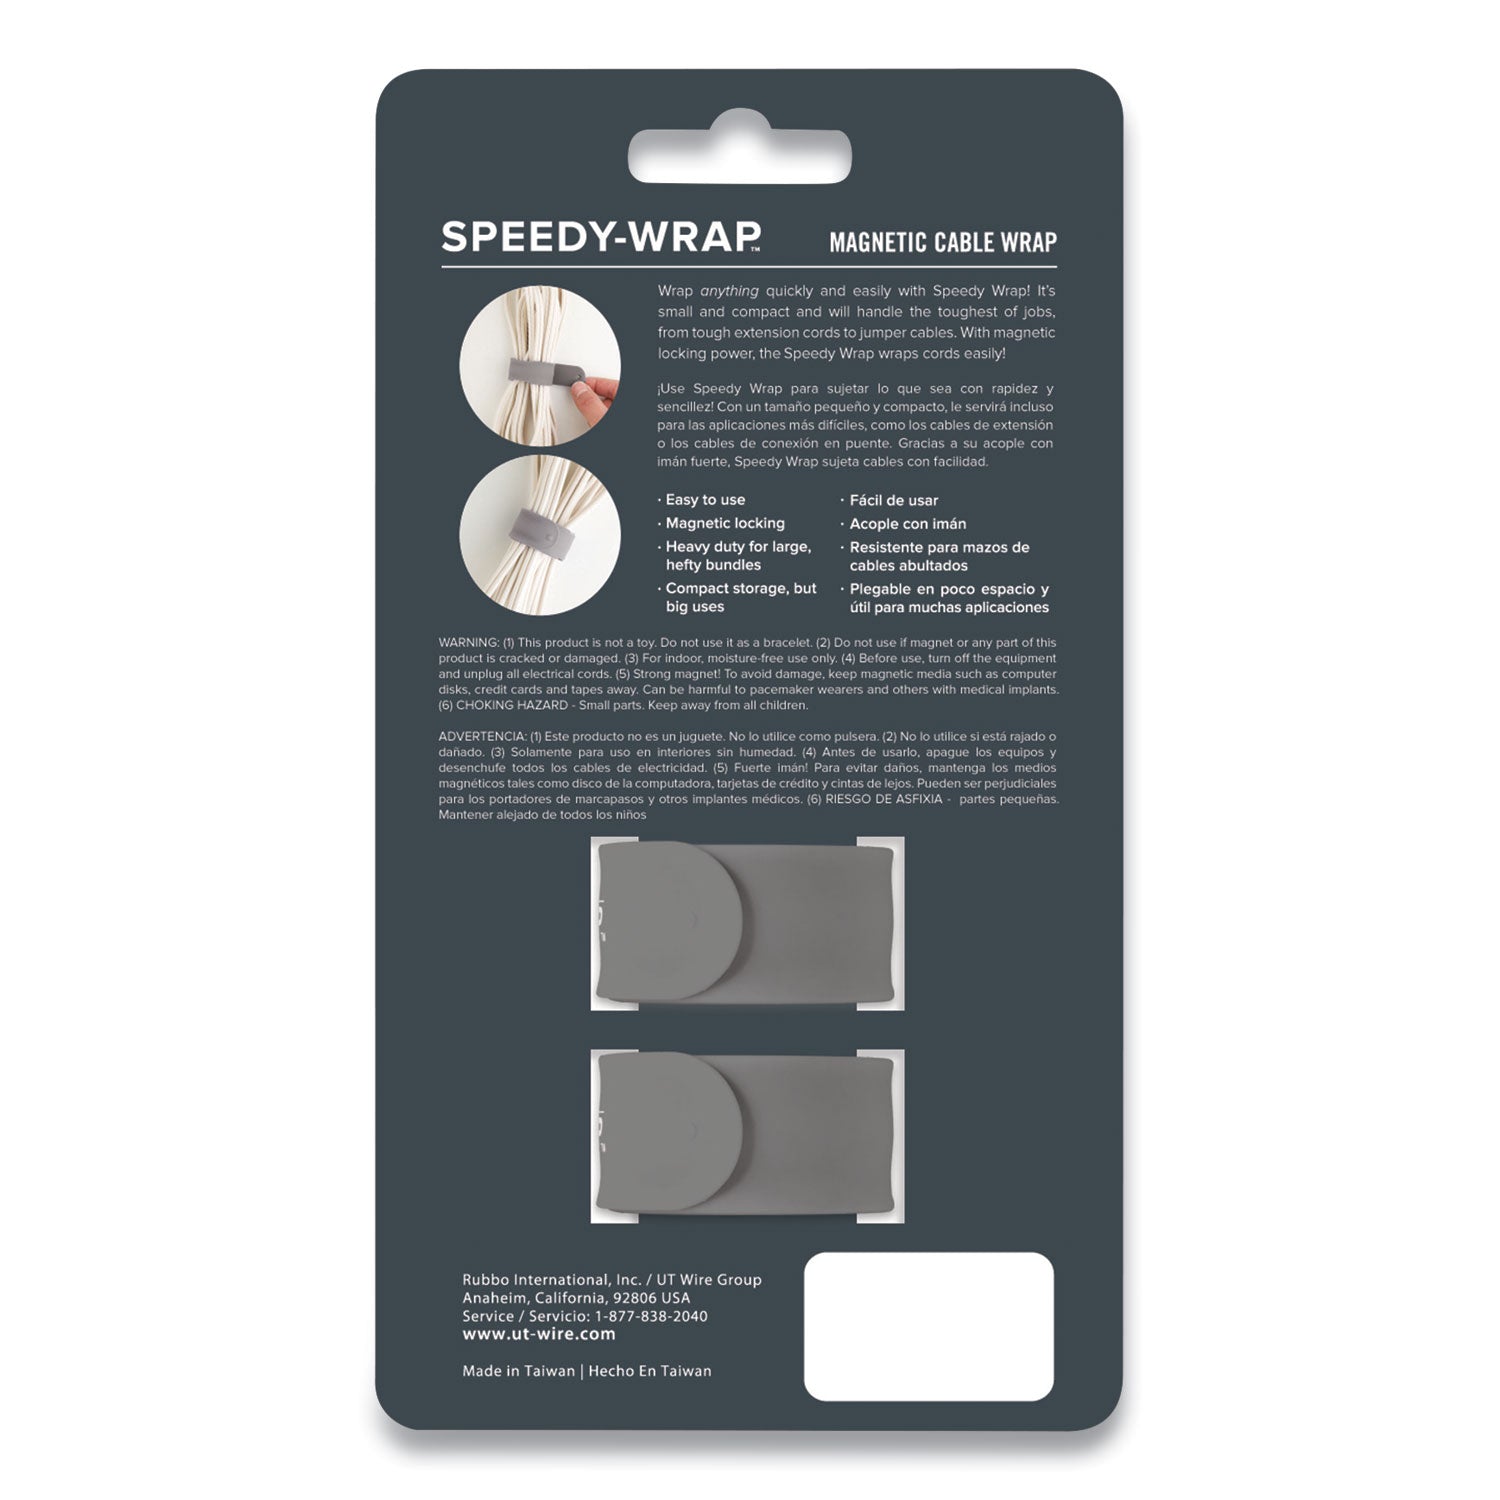 speedy-wrap-magnetic-cable-wrap-082-x-10-gray-2-pack_rboutwswm2gy - 2